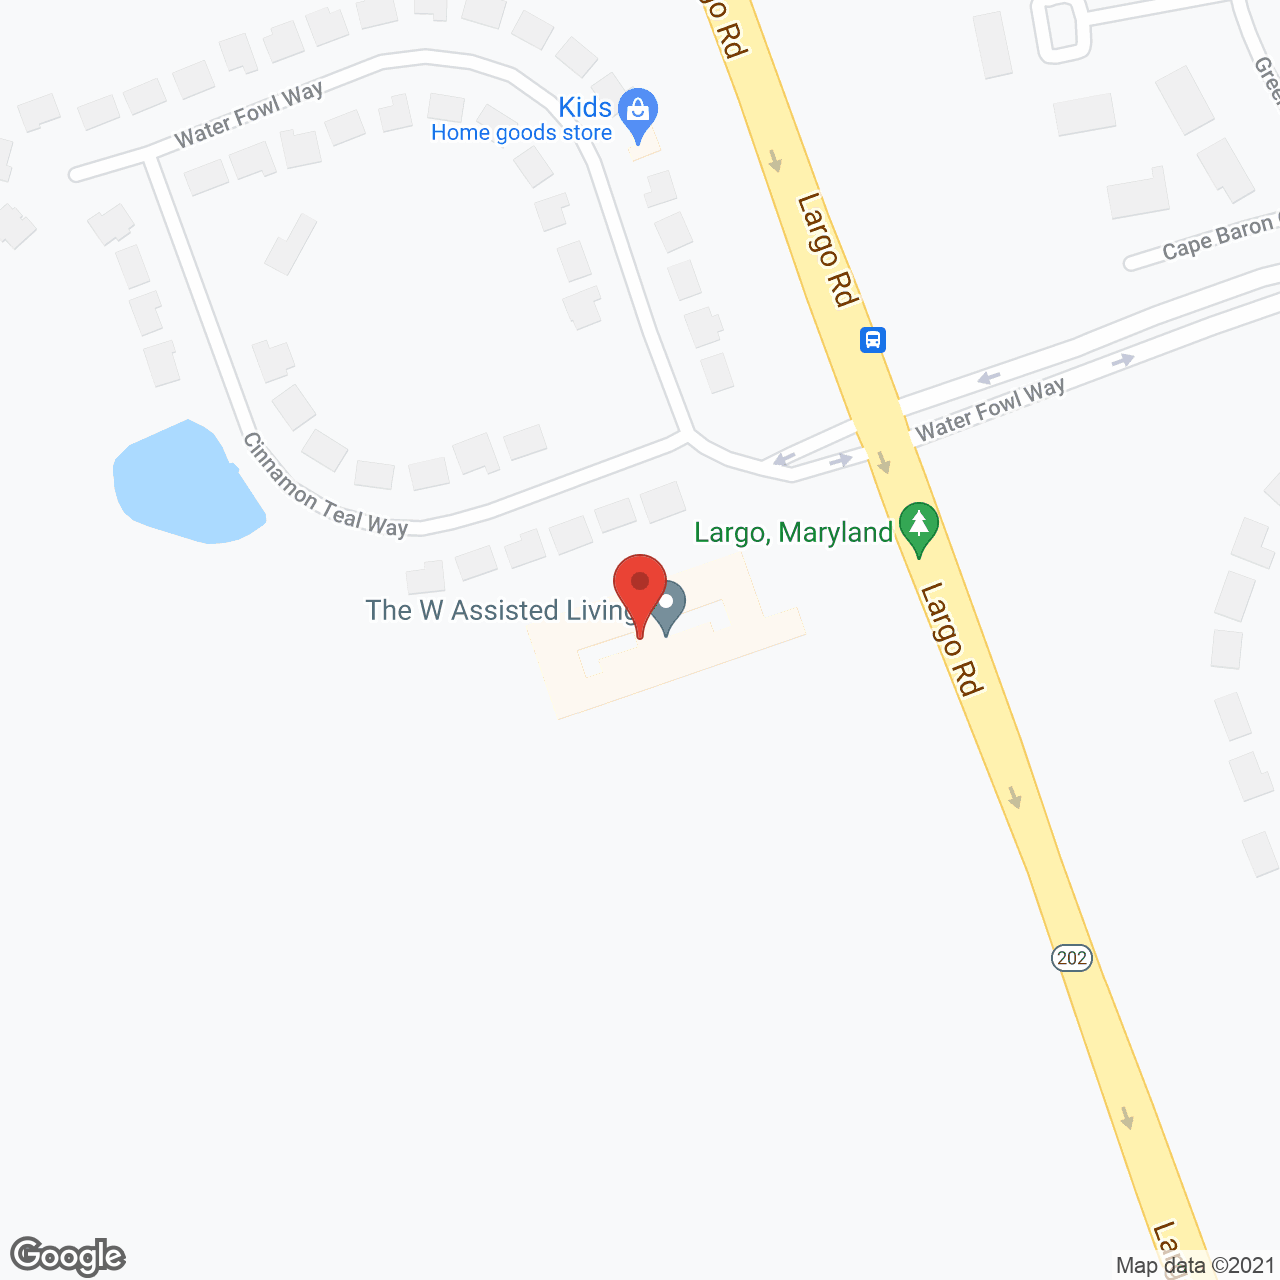 The W Assisted Living in google map